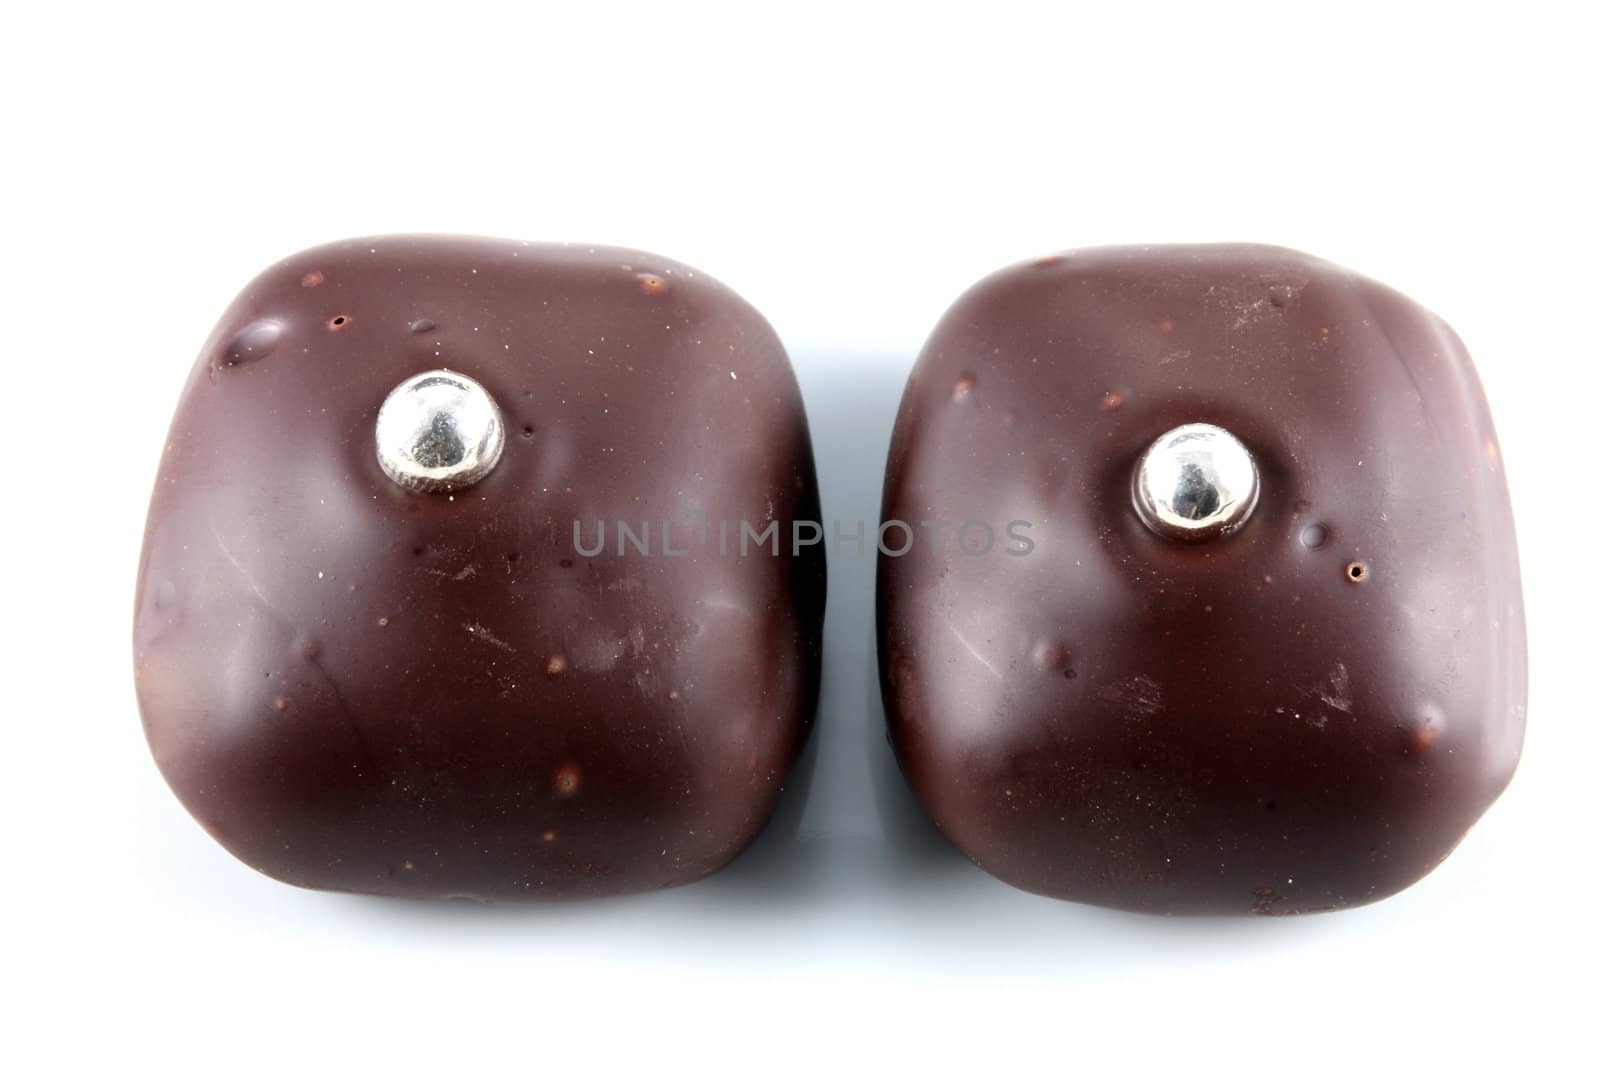 Two Black Chocolates With Decorative Beads Isolated On White Background